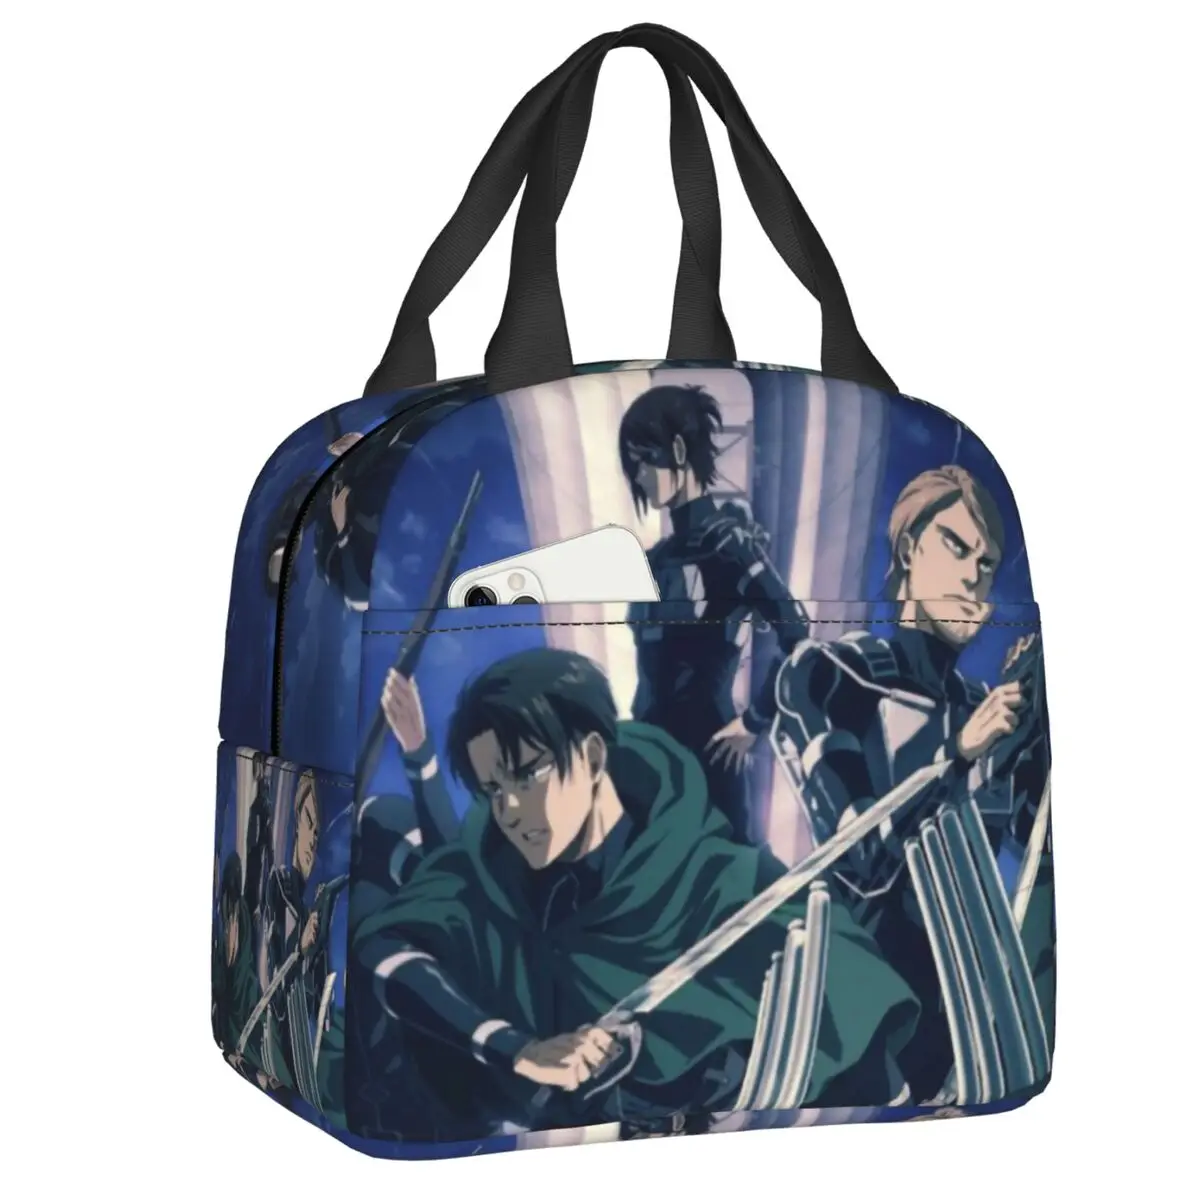 

Shingeki No Kyojin Insulated Lunch Tote Bag for Women Attack On Titan Portable Cooler Thermal Food Lunch Box Work School Travel